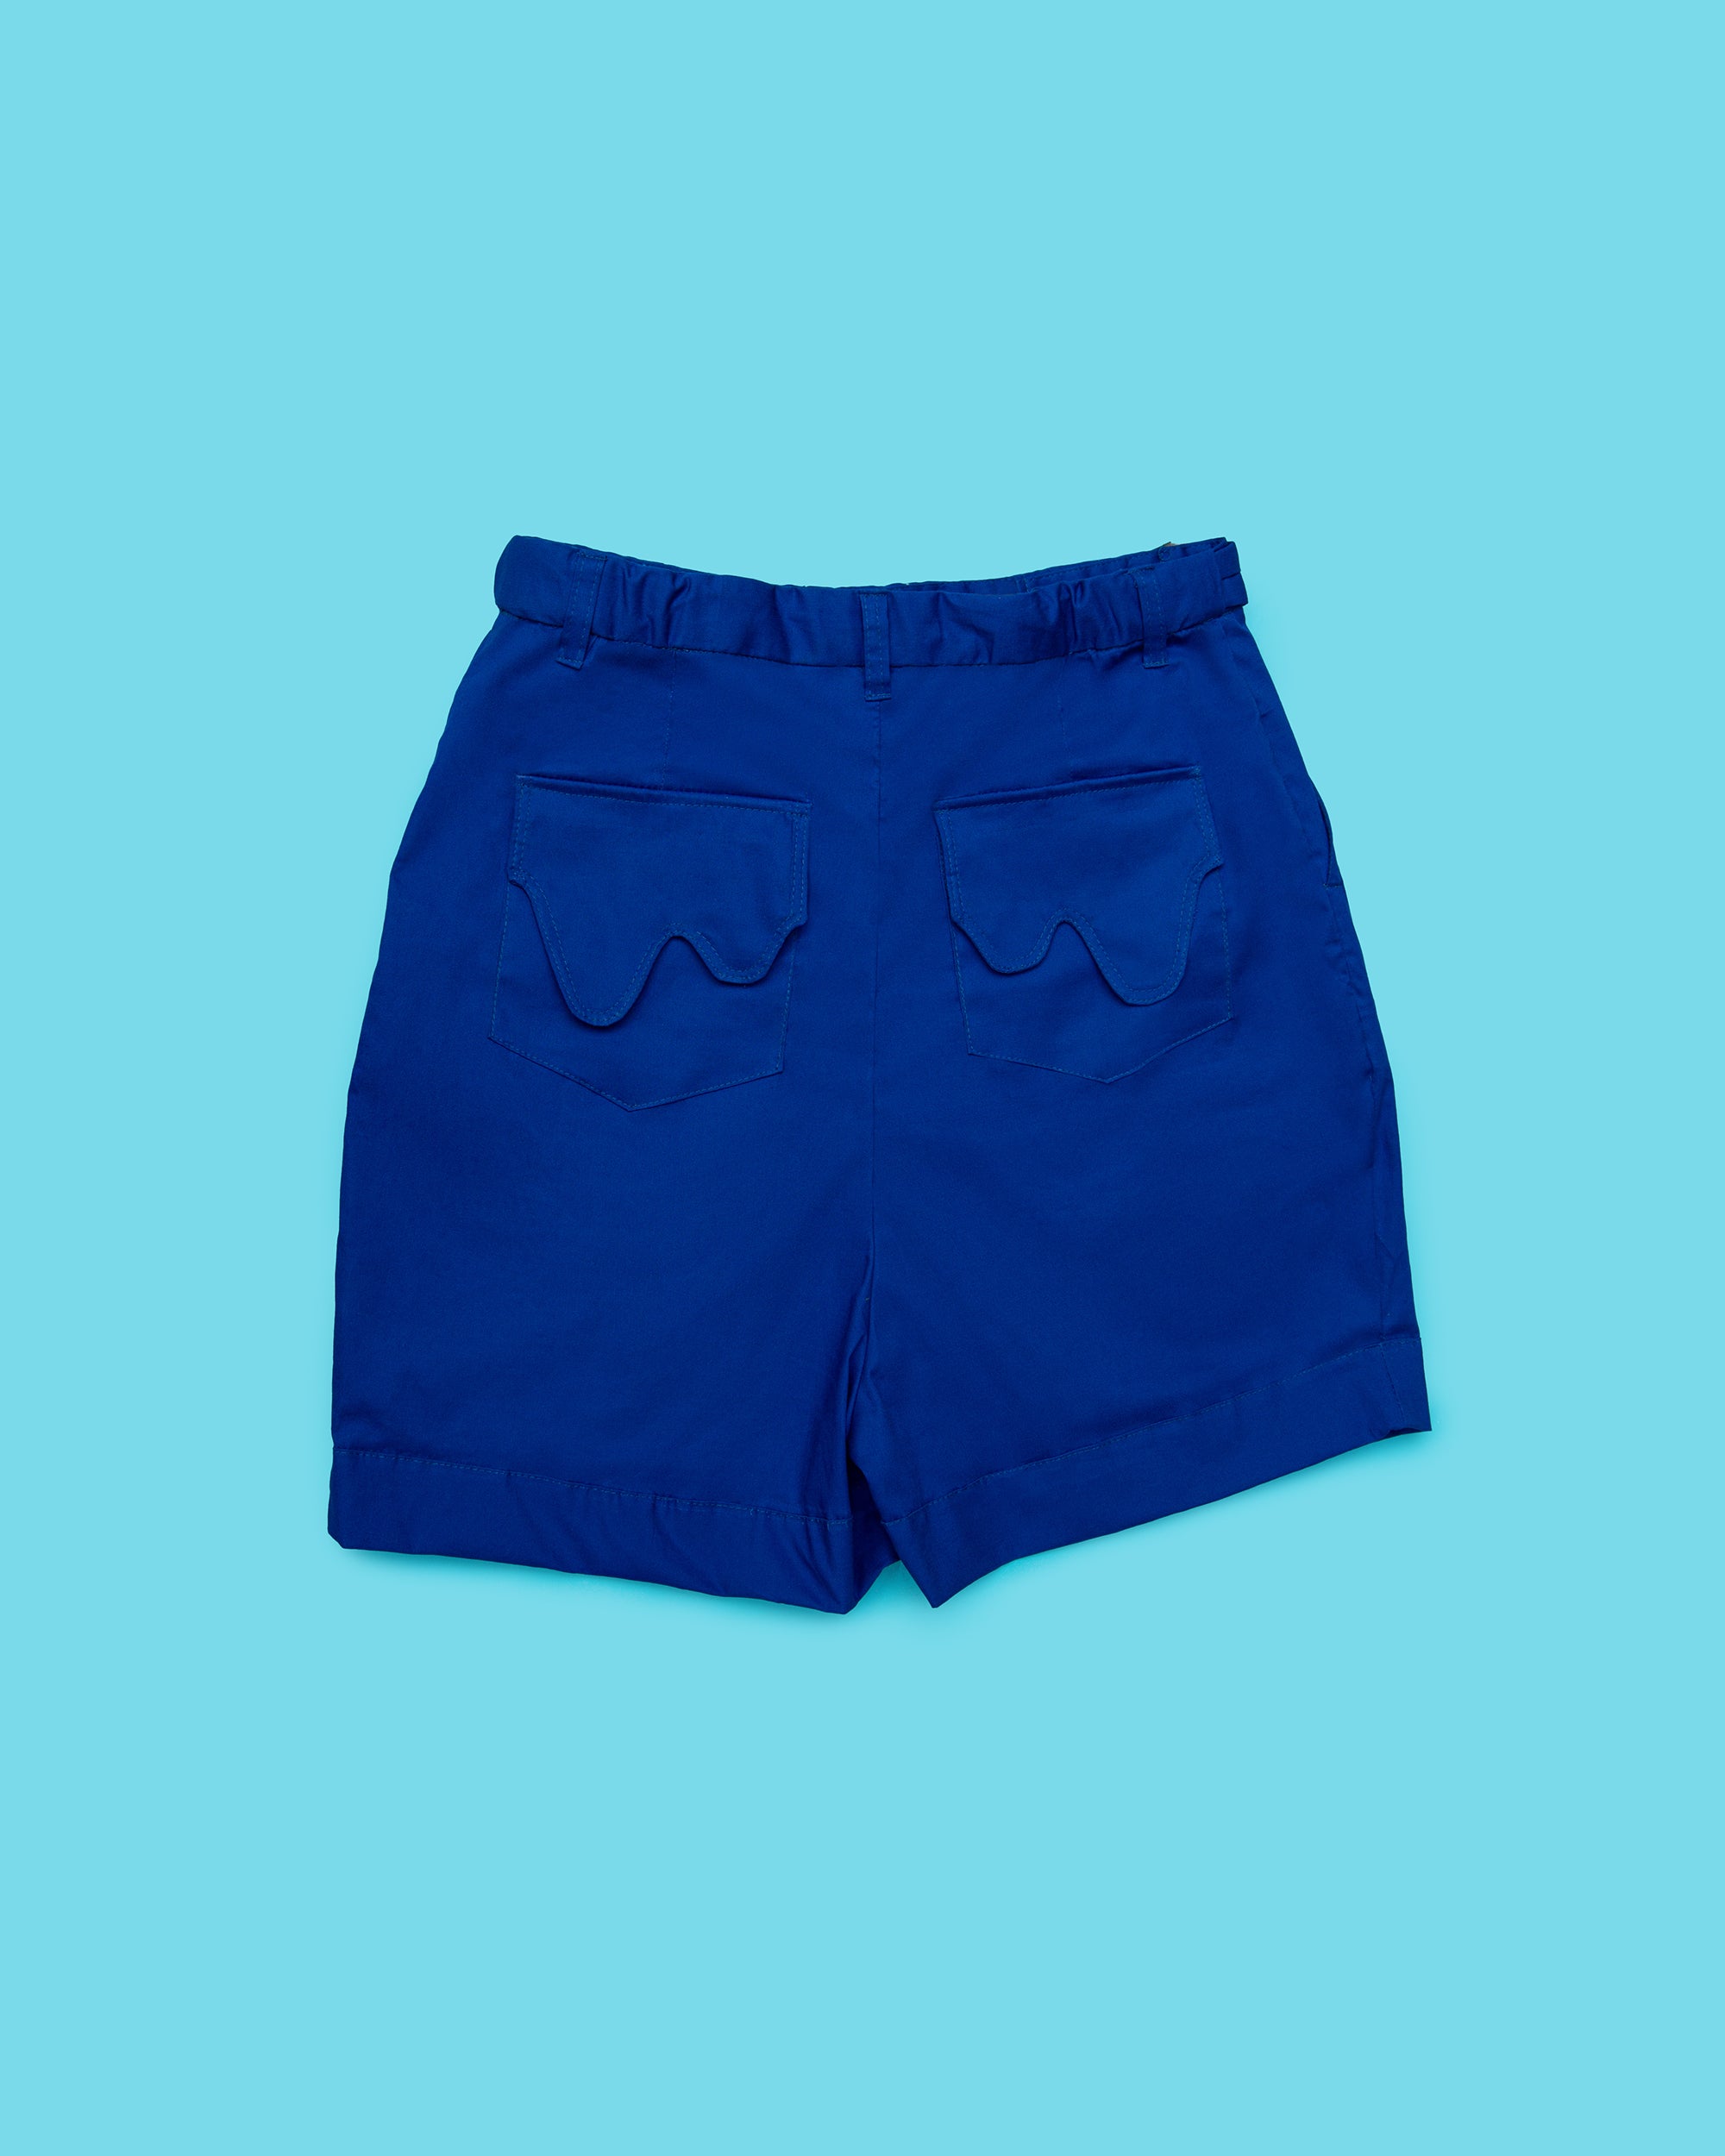 The Uniform Shorts in Blue